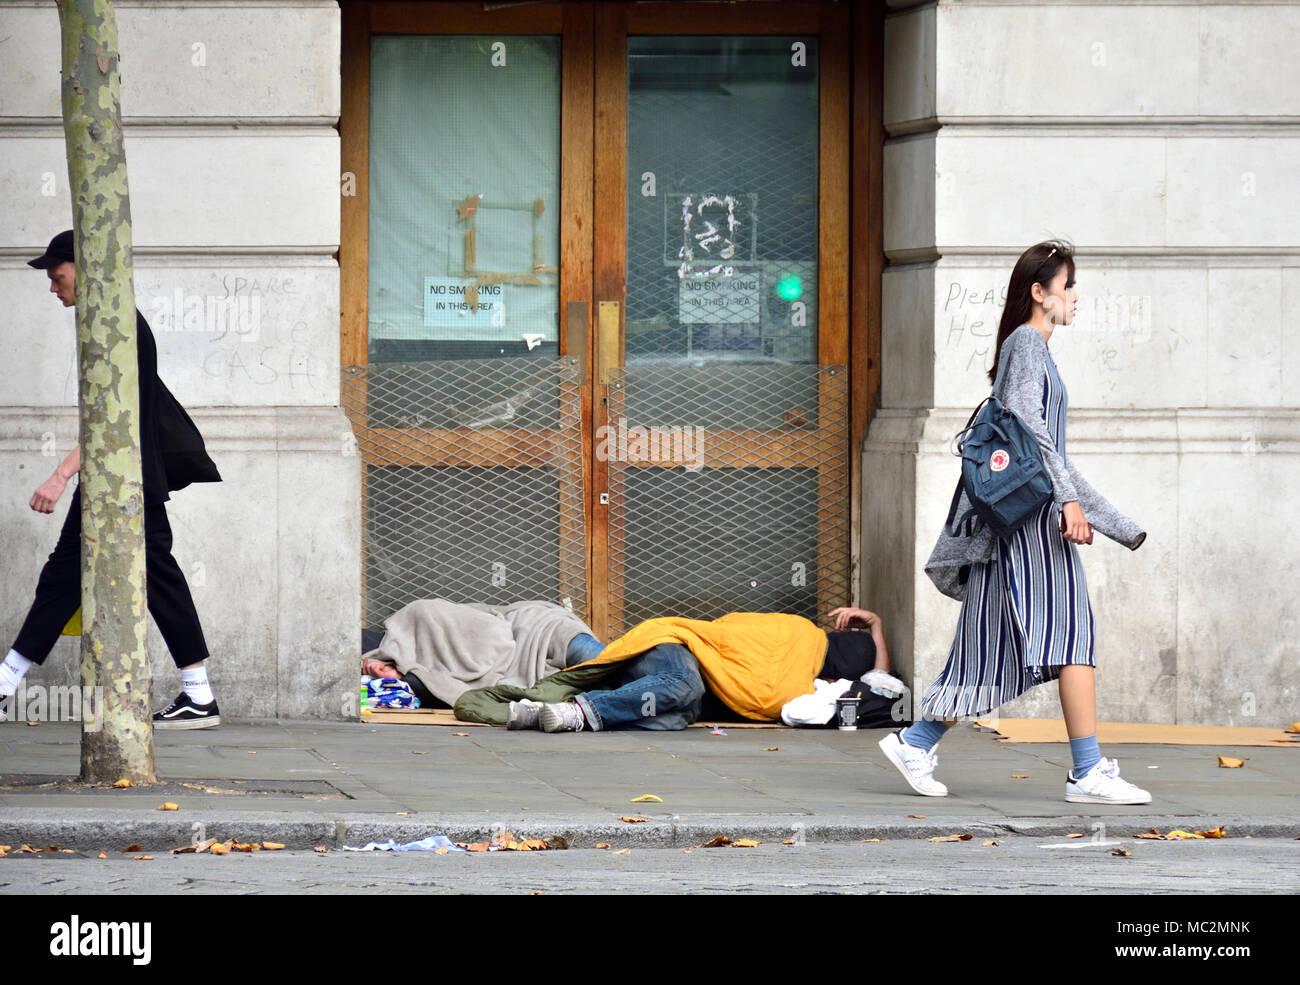 London, England, UK. Two homeless people sleeping in a doorway in St Martin's Place, near Trafalgar Square - PEOPLE WALKING PAST Stock Photo